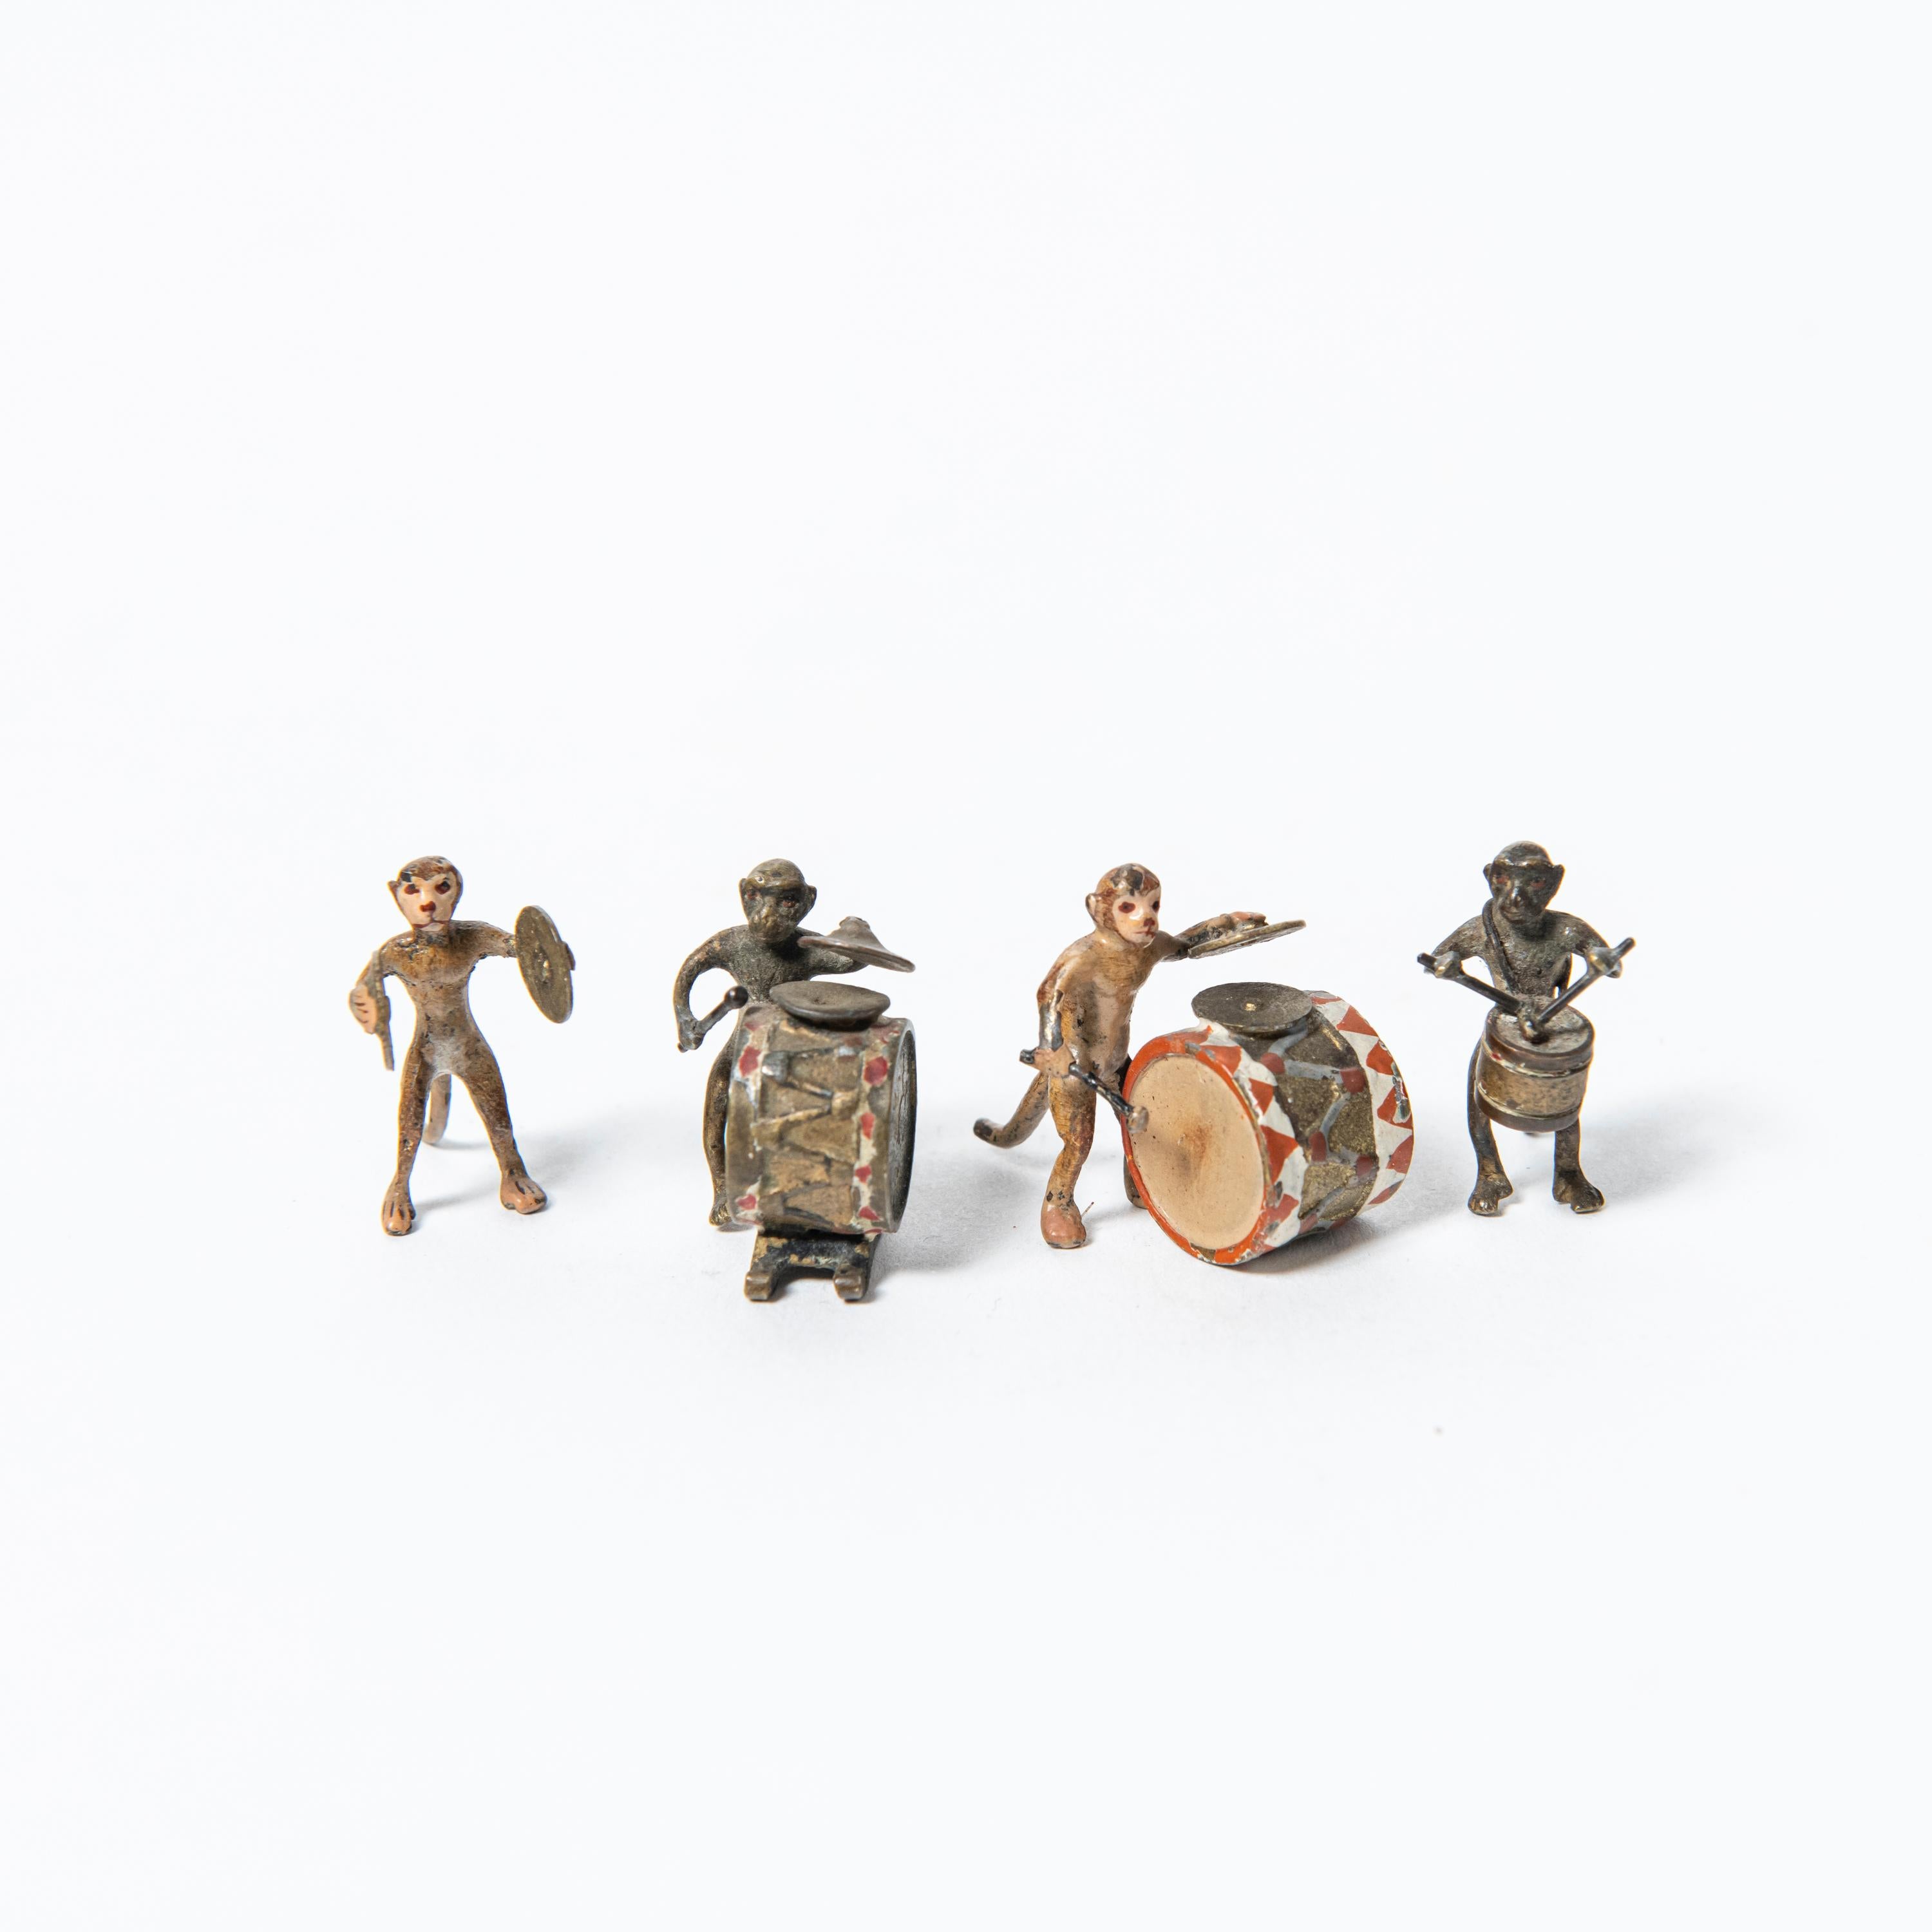 Set of 8 Cold-painted bronze monkeys band sculpture attributed to Franz Bergmann. Austria, early 20th century.